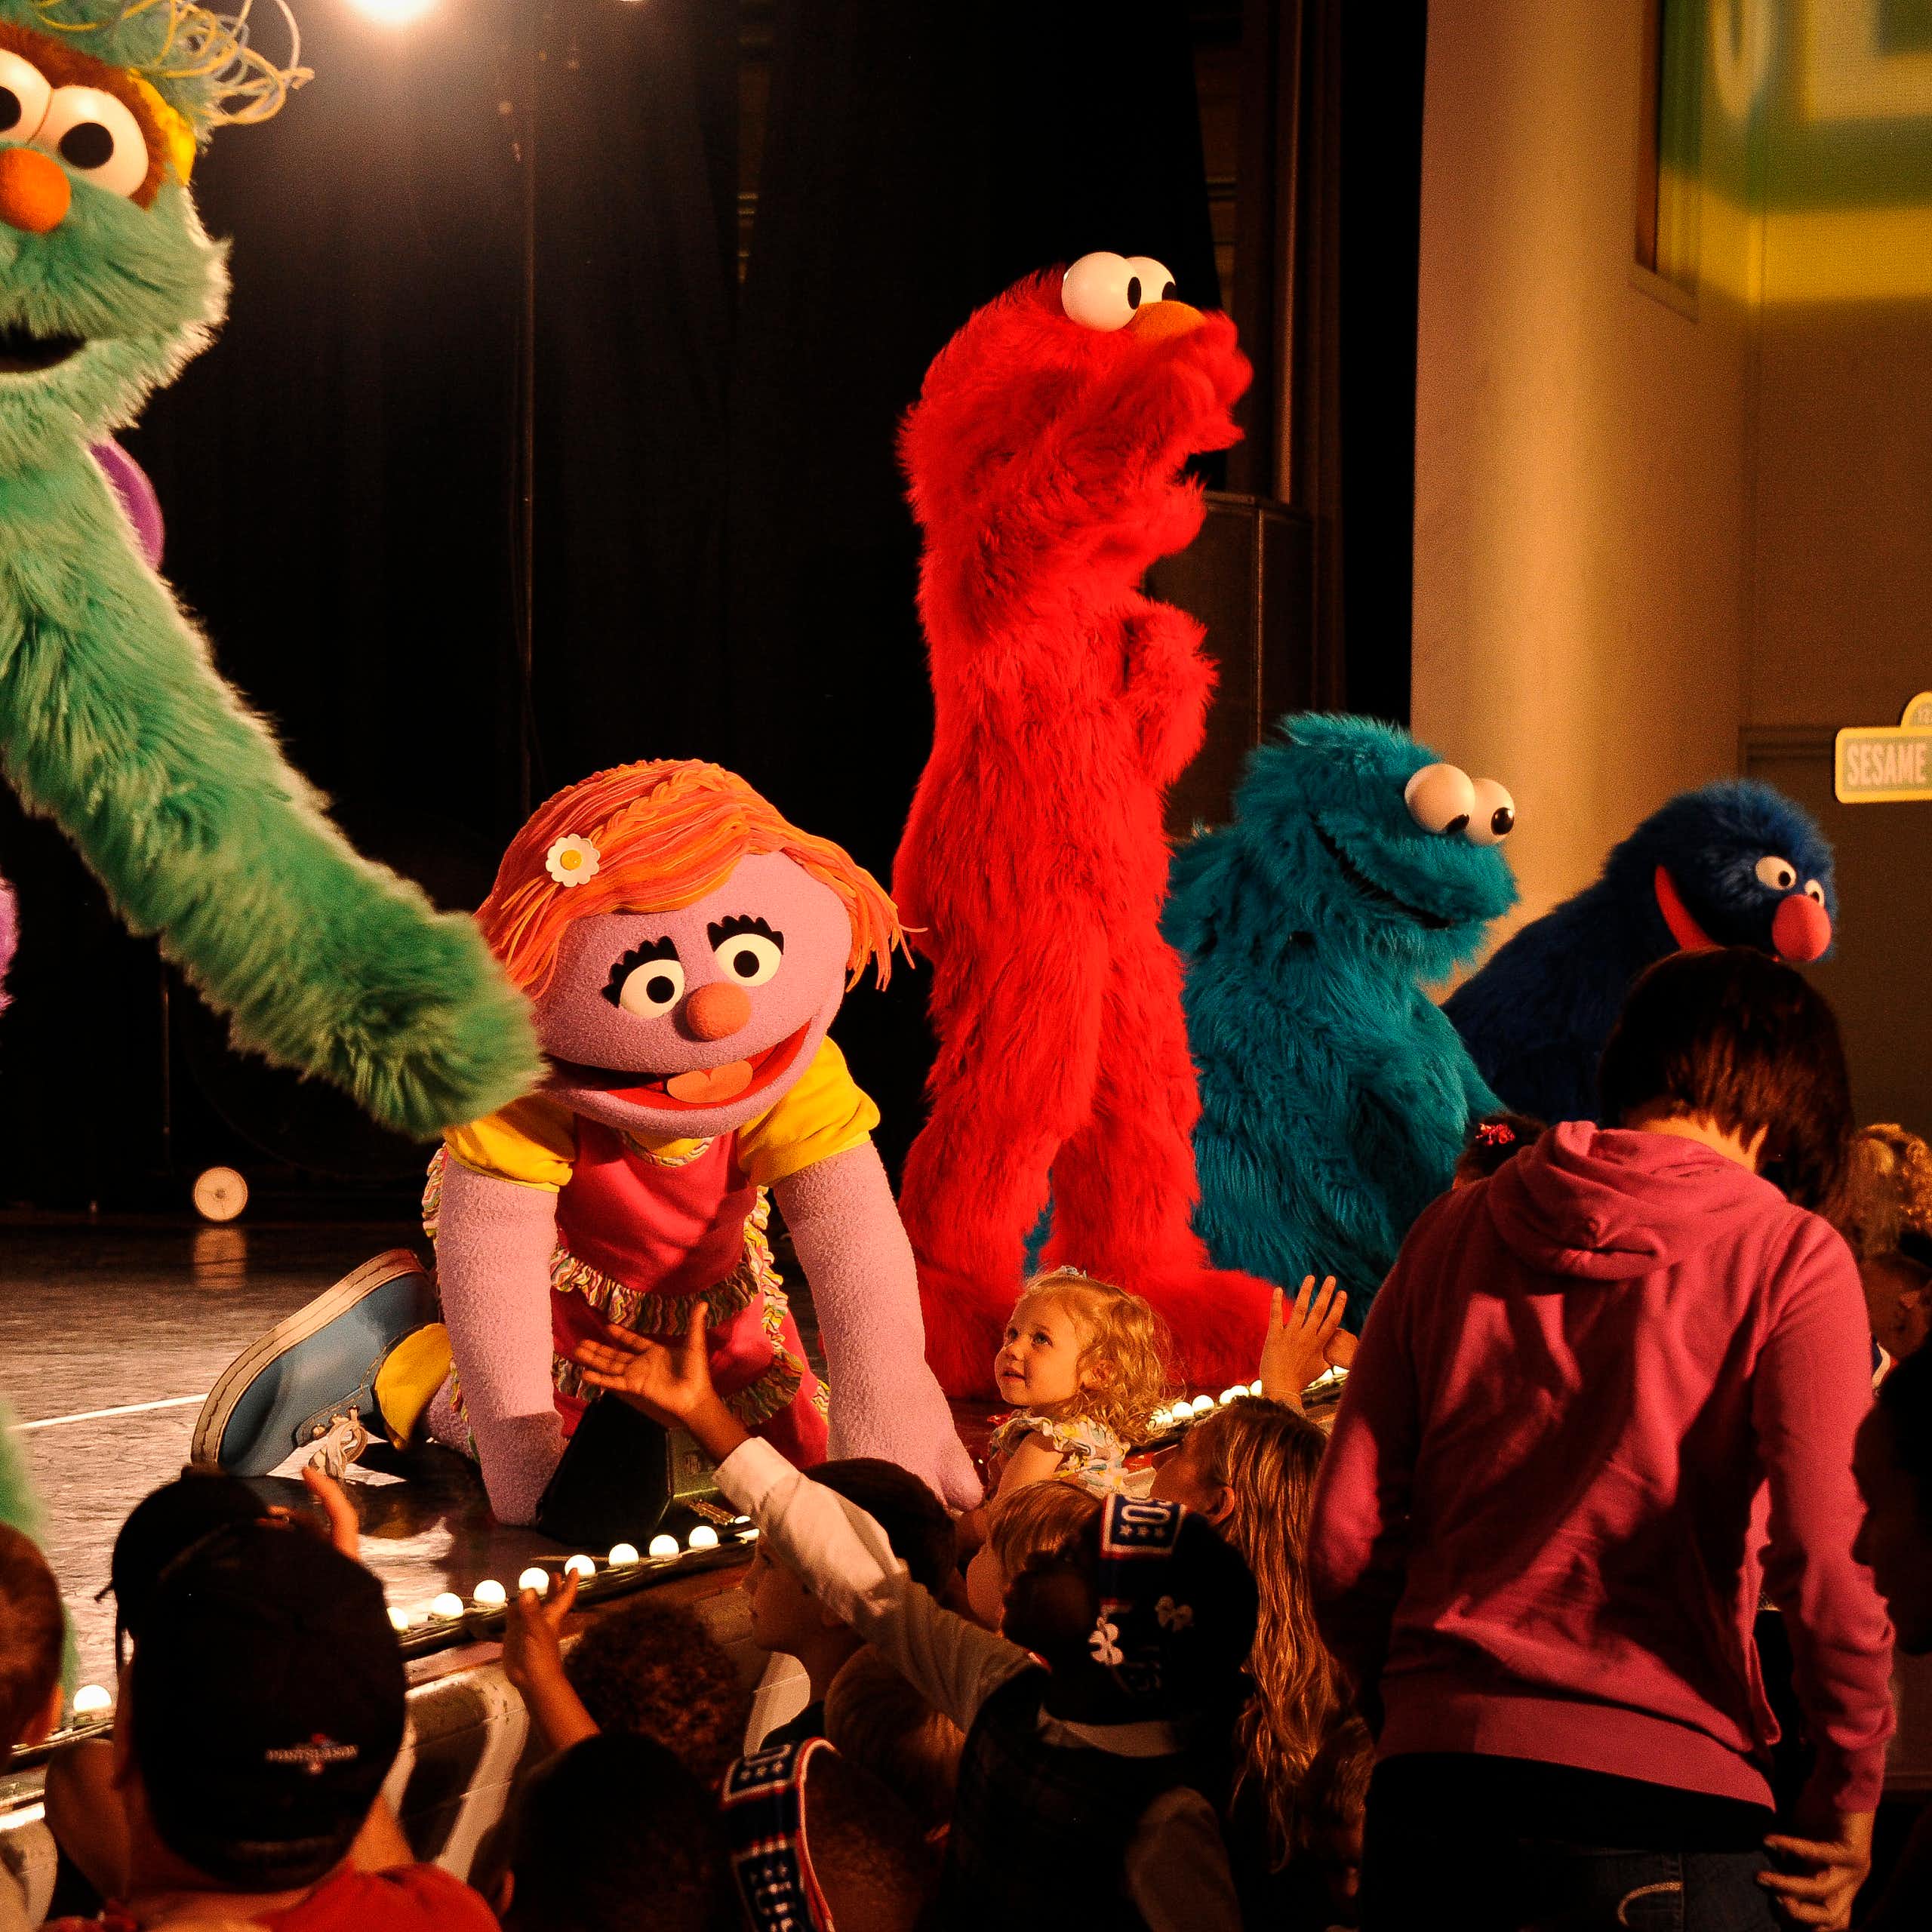 Large Sesame Street characters Rosita, Katie, Elmo, Cookie Monster and Grover stand on stage reaching out to children in the audience